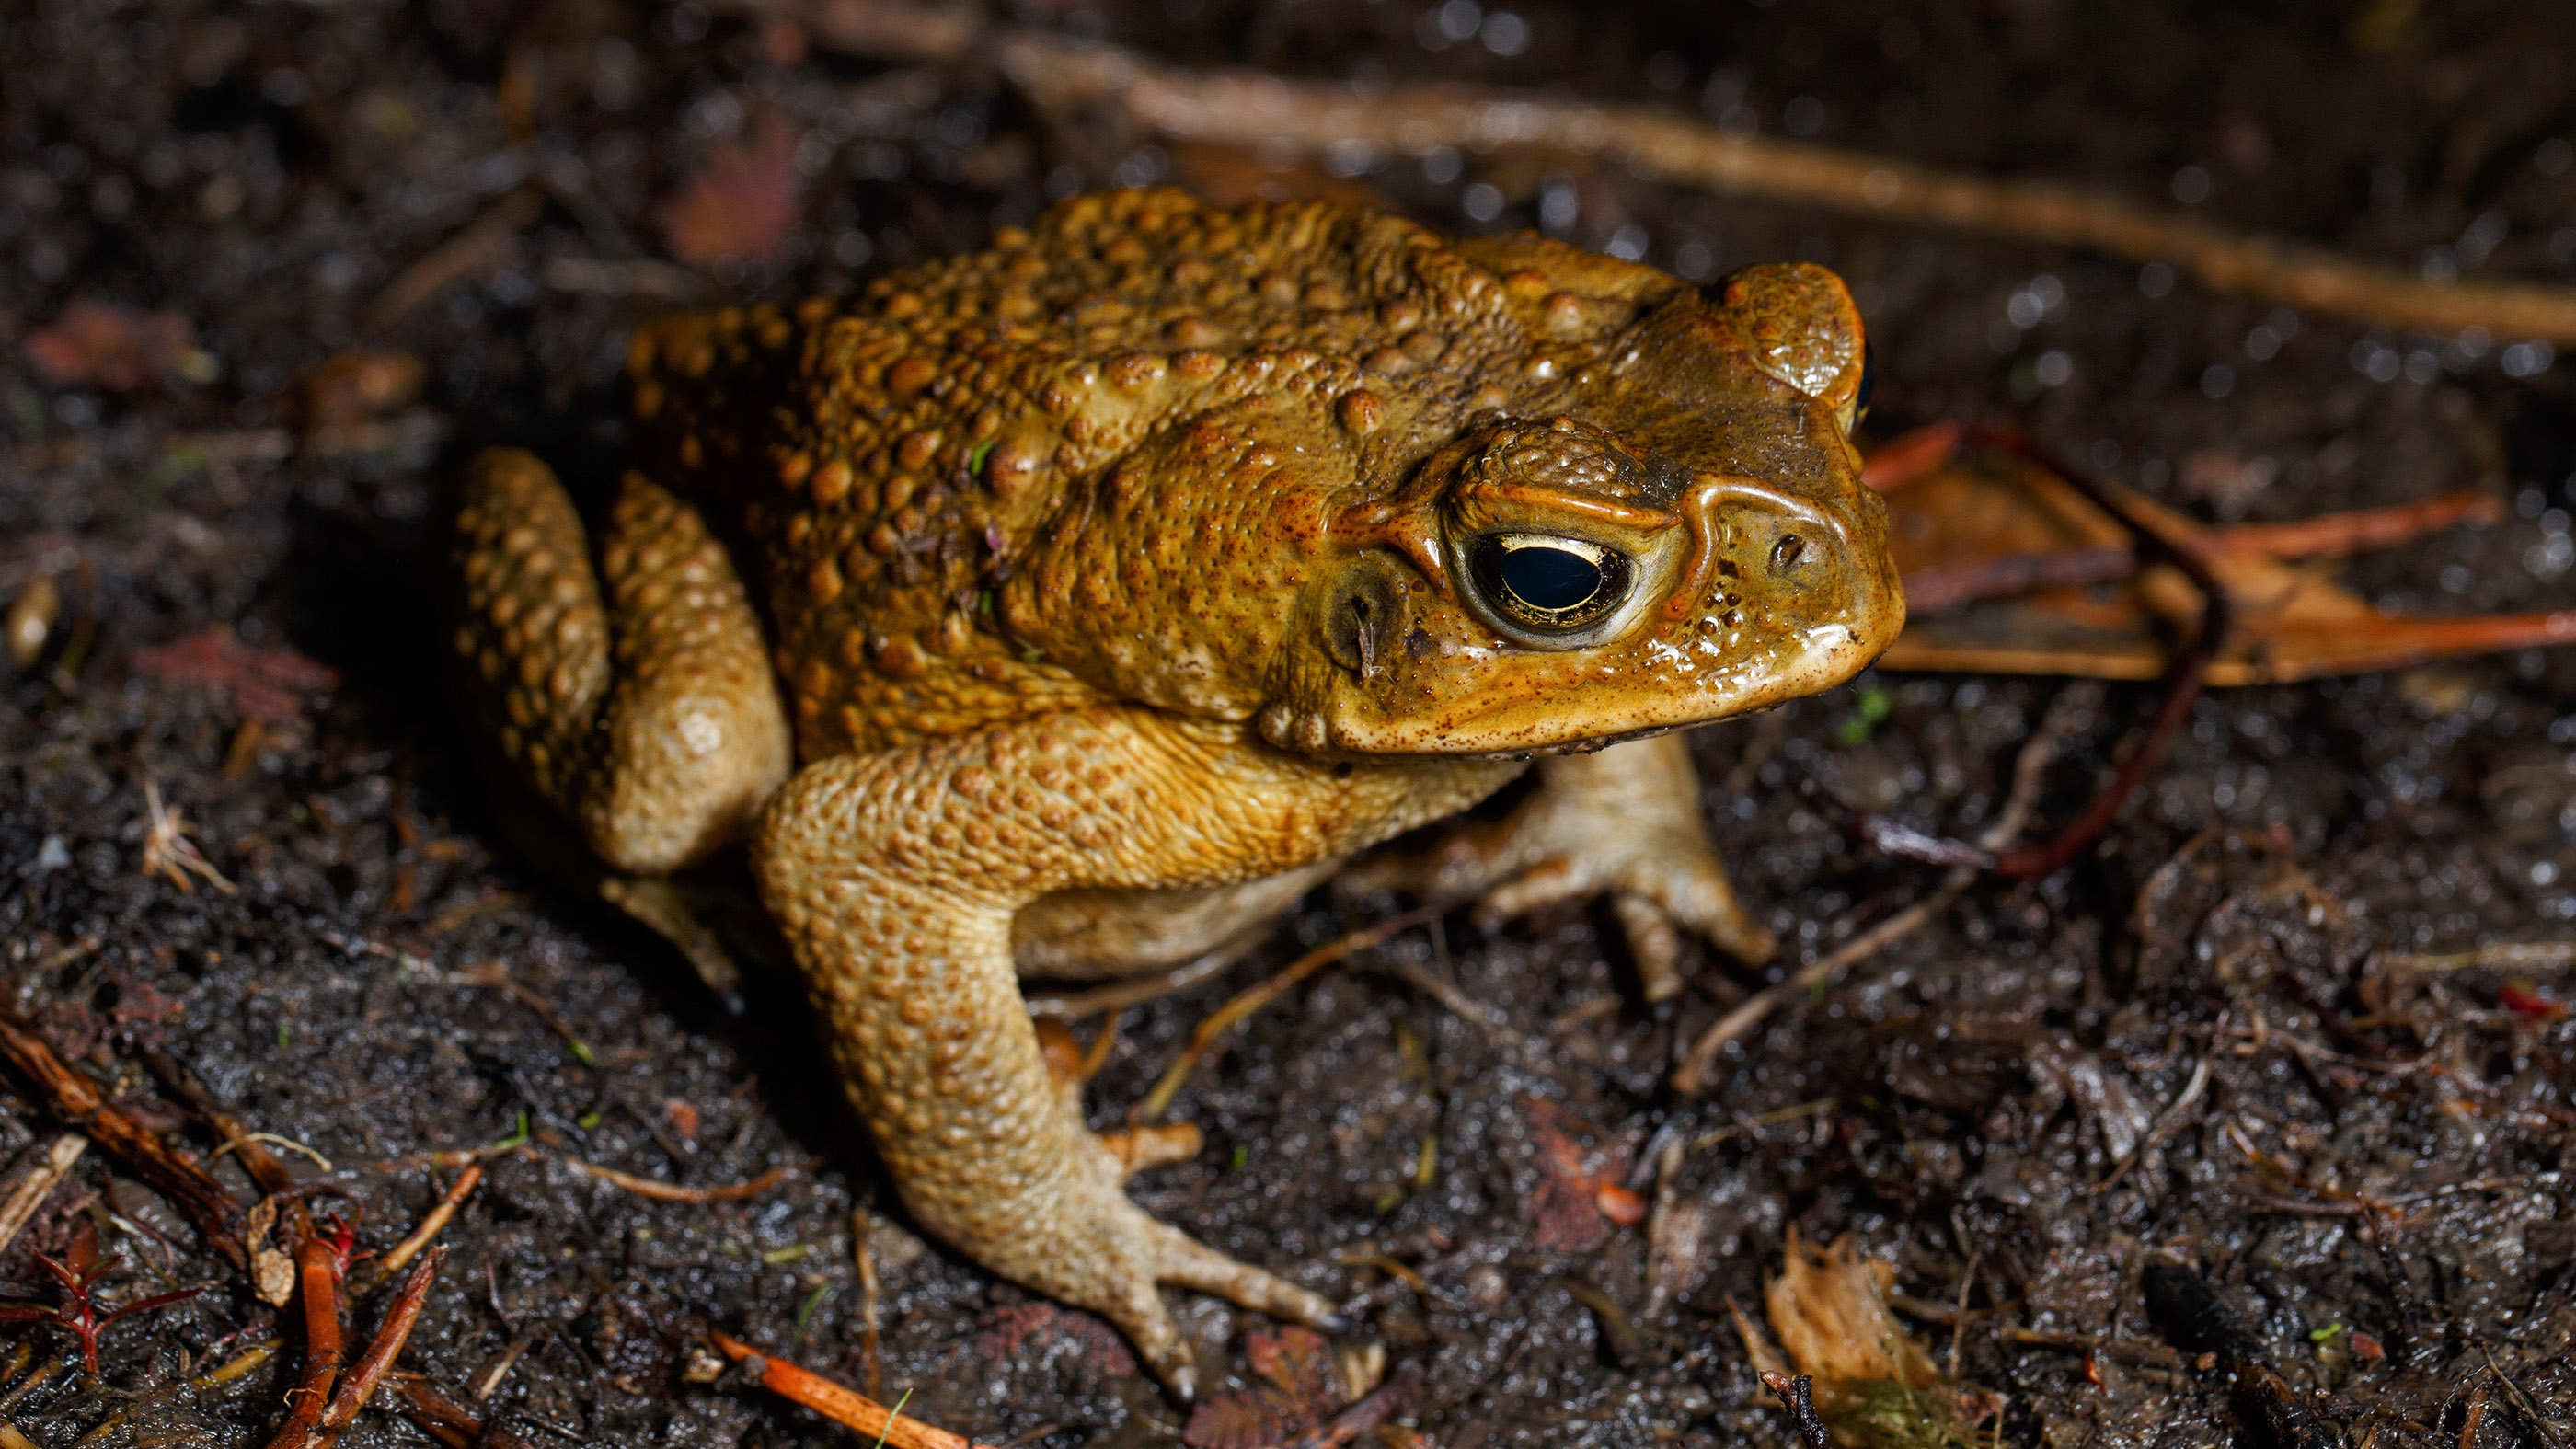 Cane toads (Rhinella marina) are poisonous amphibians of the Bufonidae family.